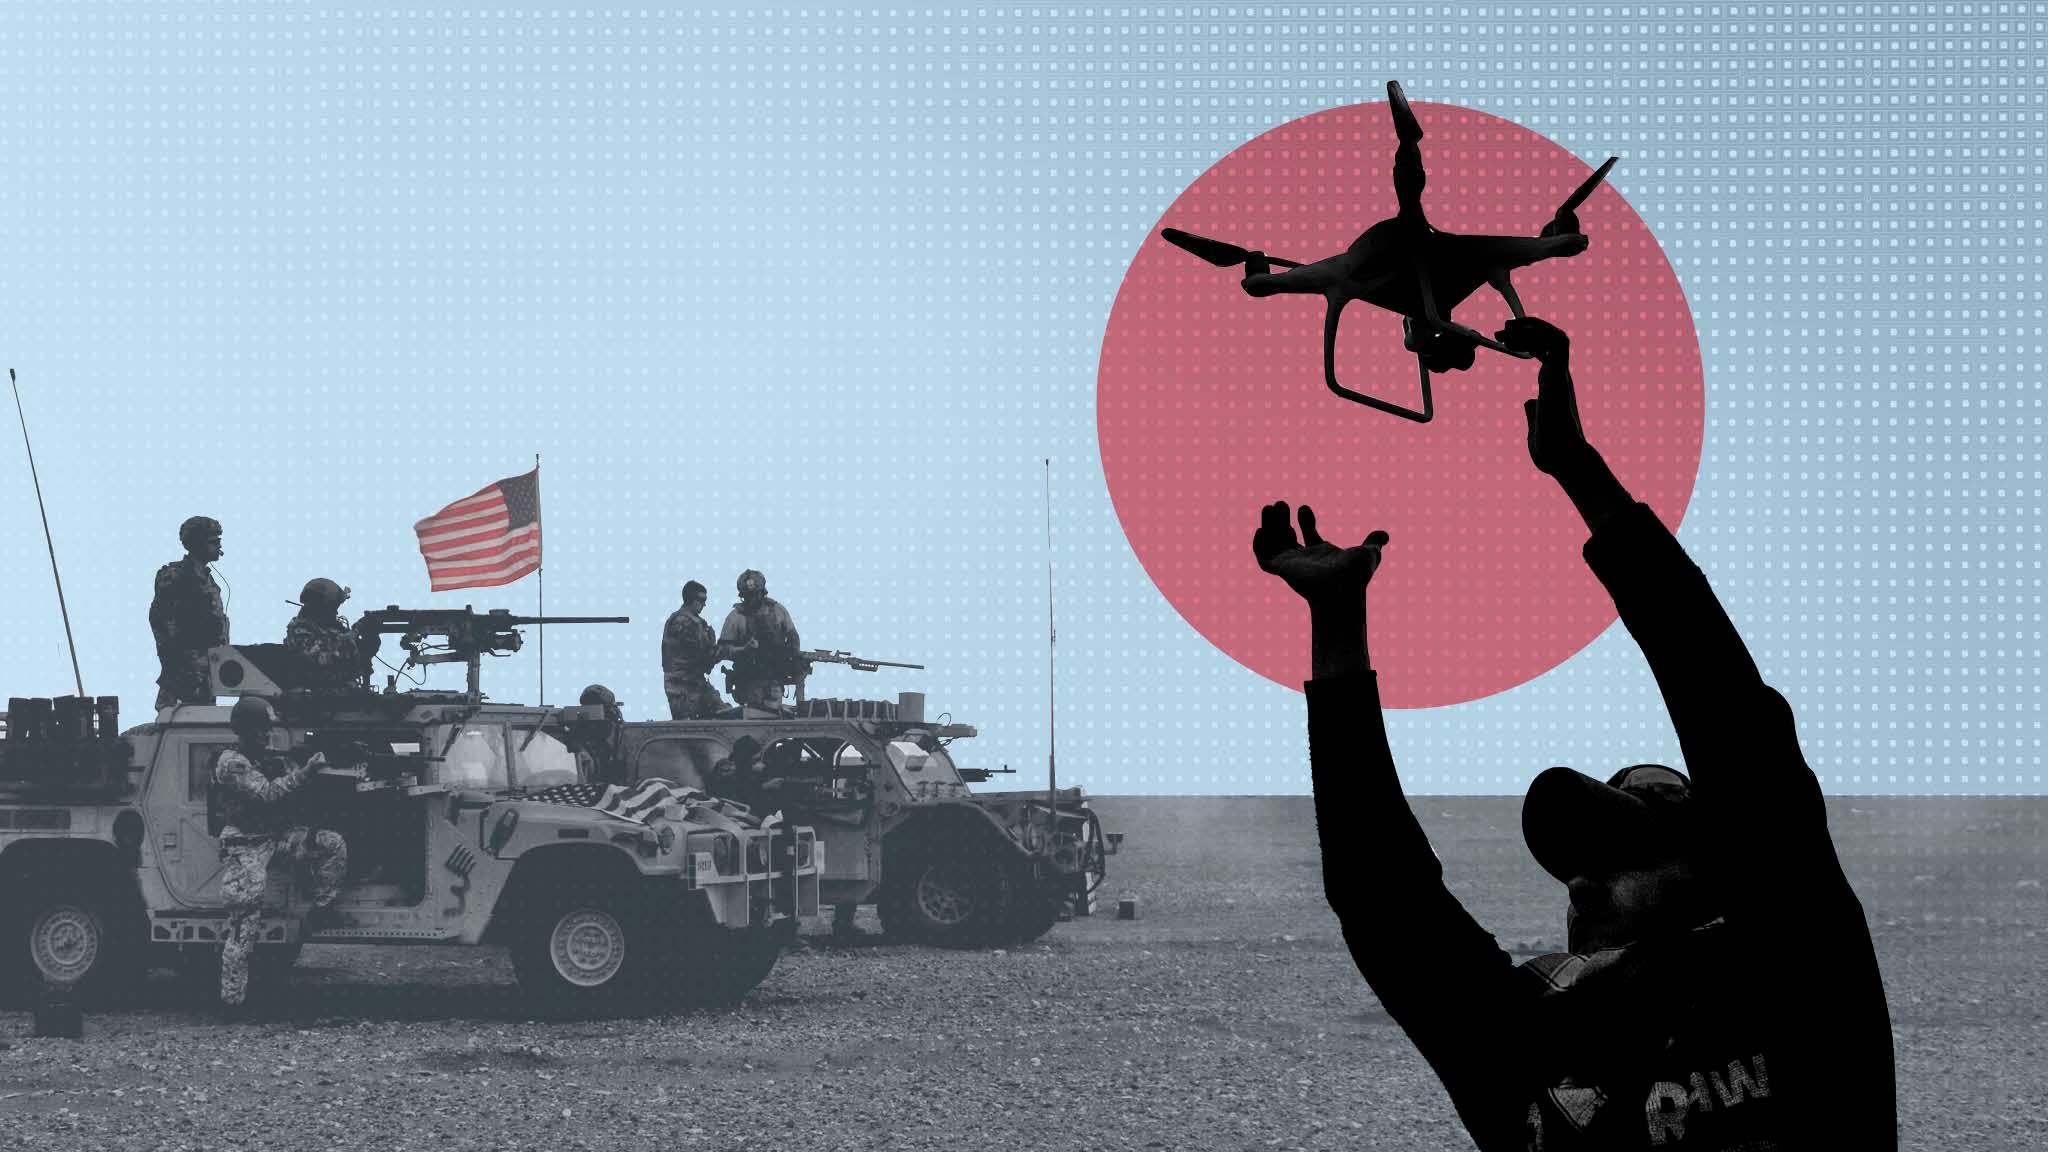 Low Cost Warfare: US Military Battles With 'Costco Drones'